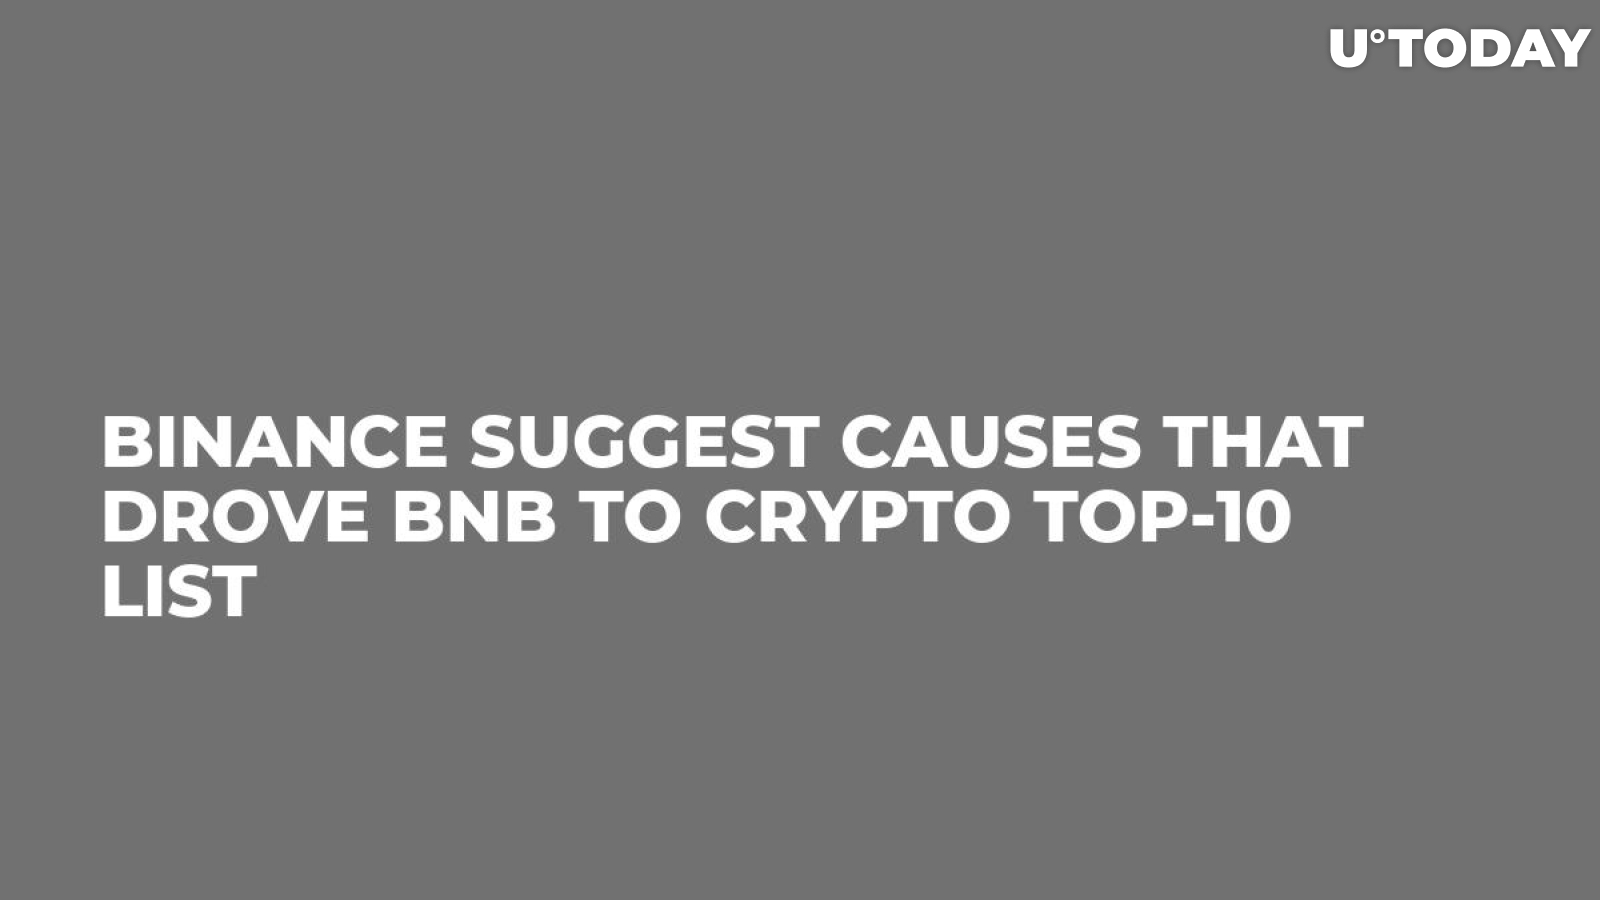 Binance Suggest Causes That Drove BNB to Crypto Top-10 List